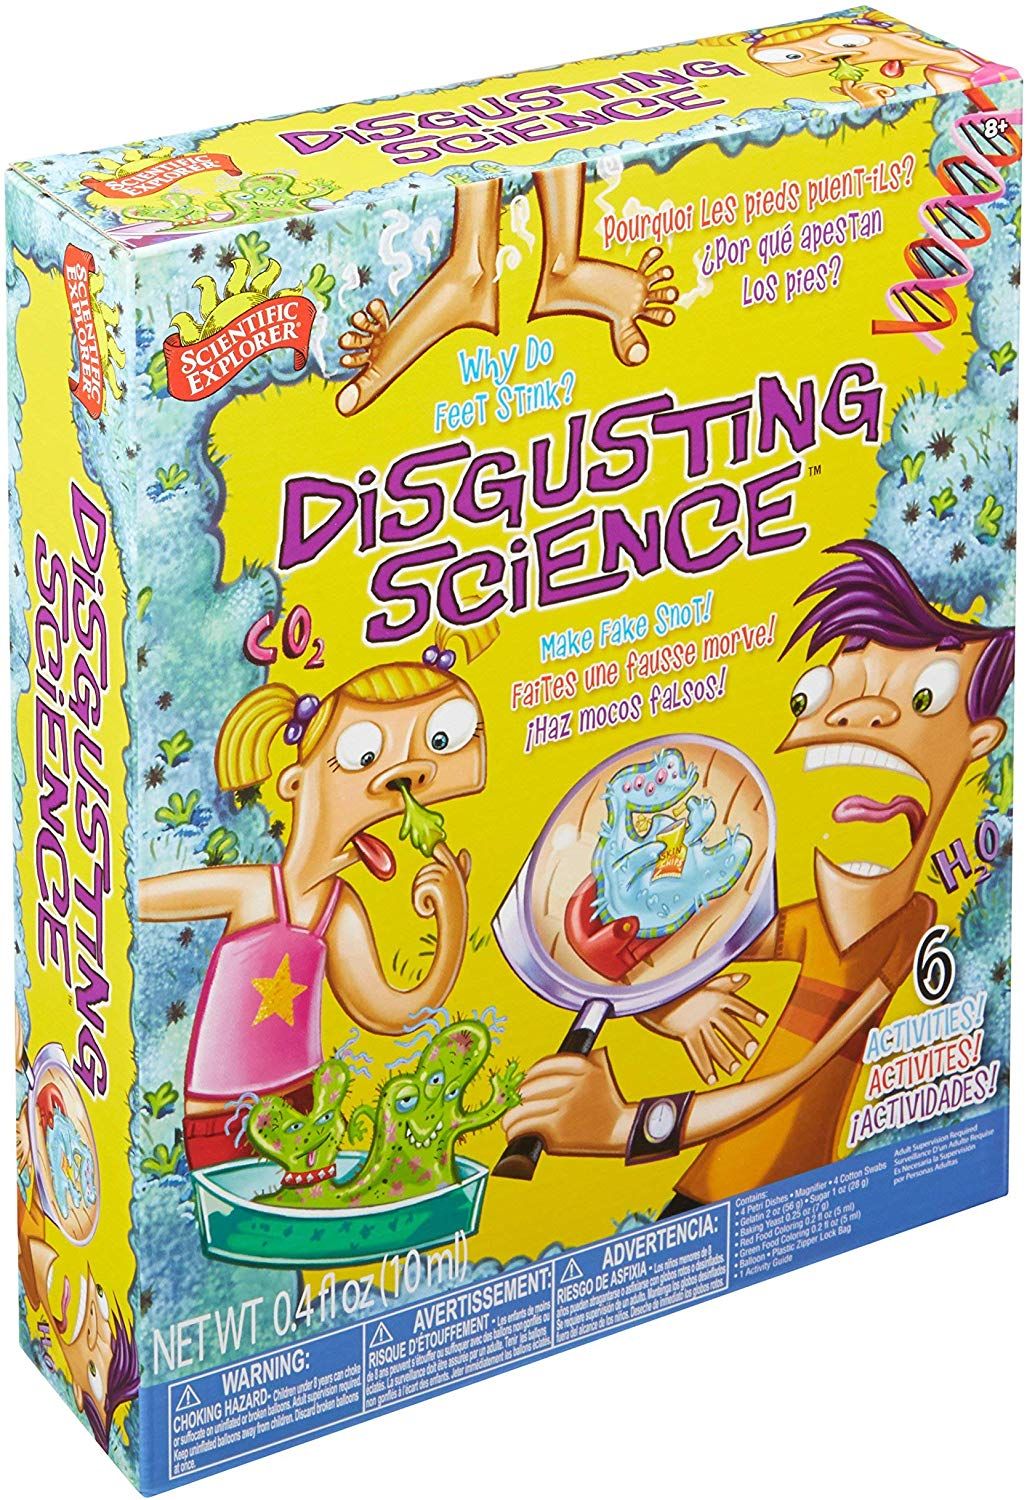 science kit 6 year old